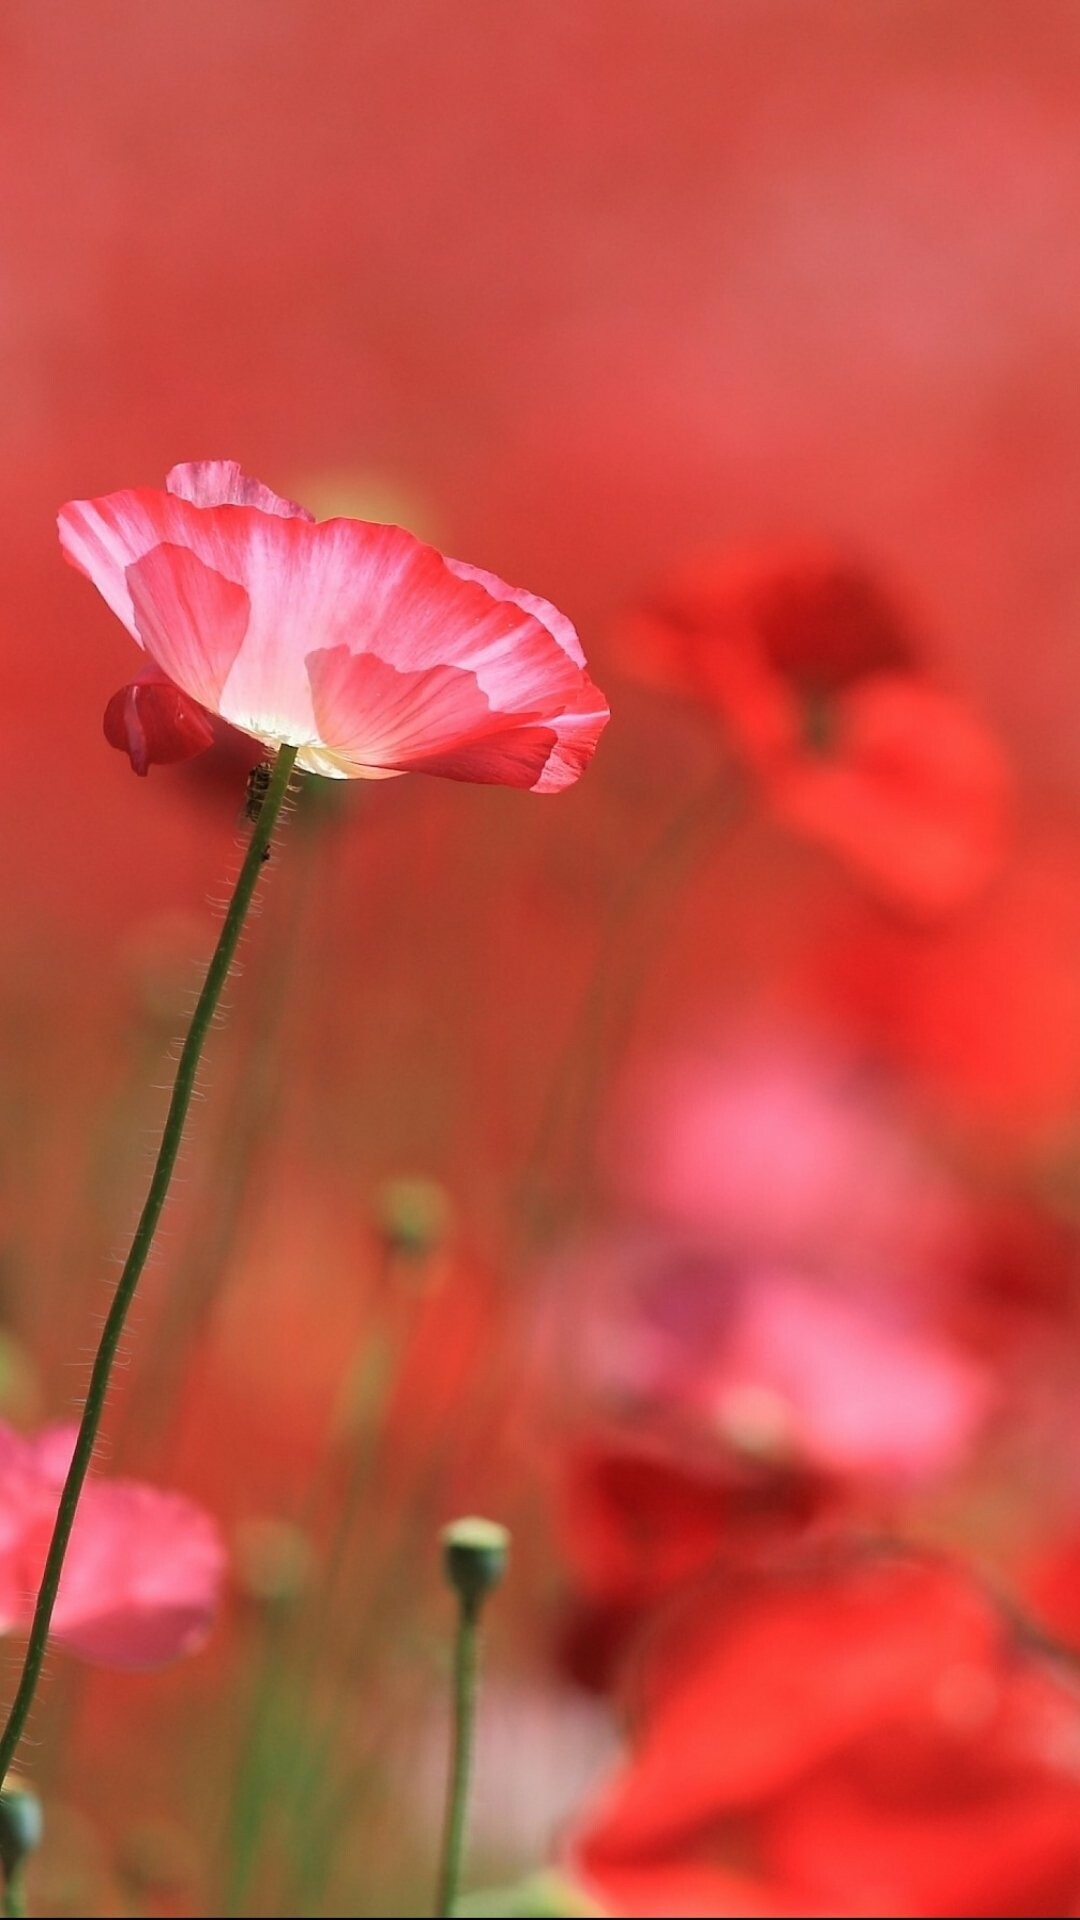 Poppy Flower: The flowers used as a symbol around the world to remember those who died in military service. 1080x1920 Full HD Background.